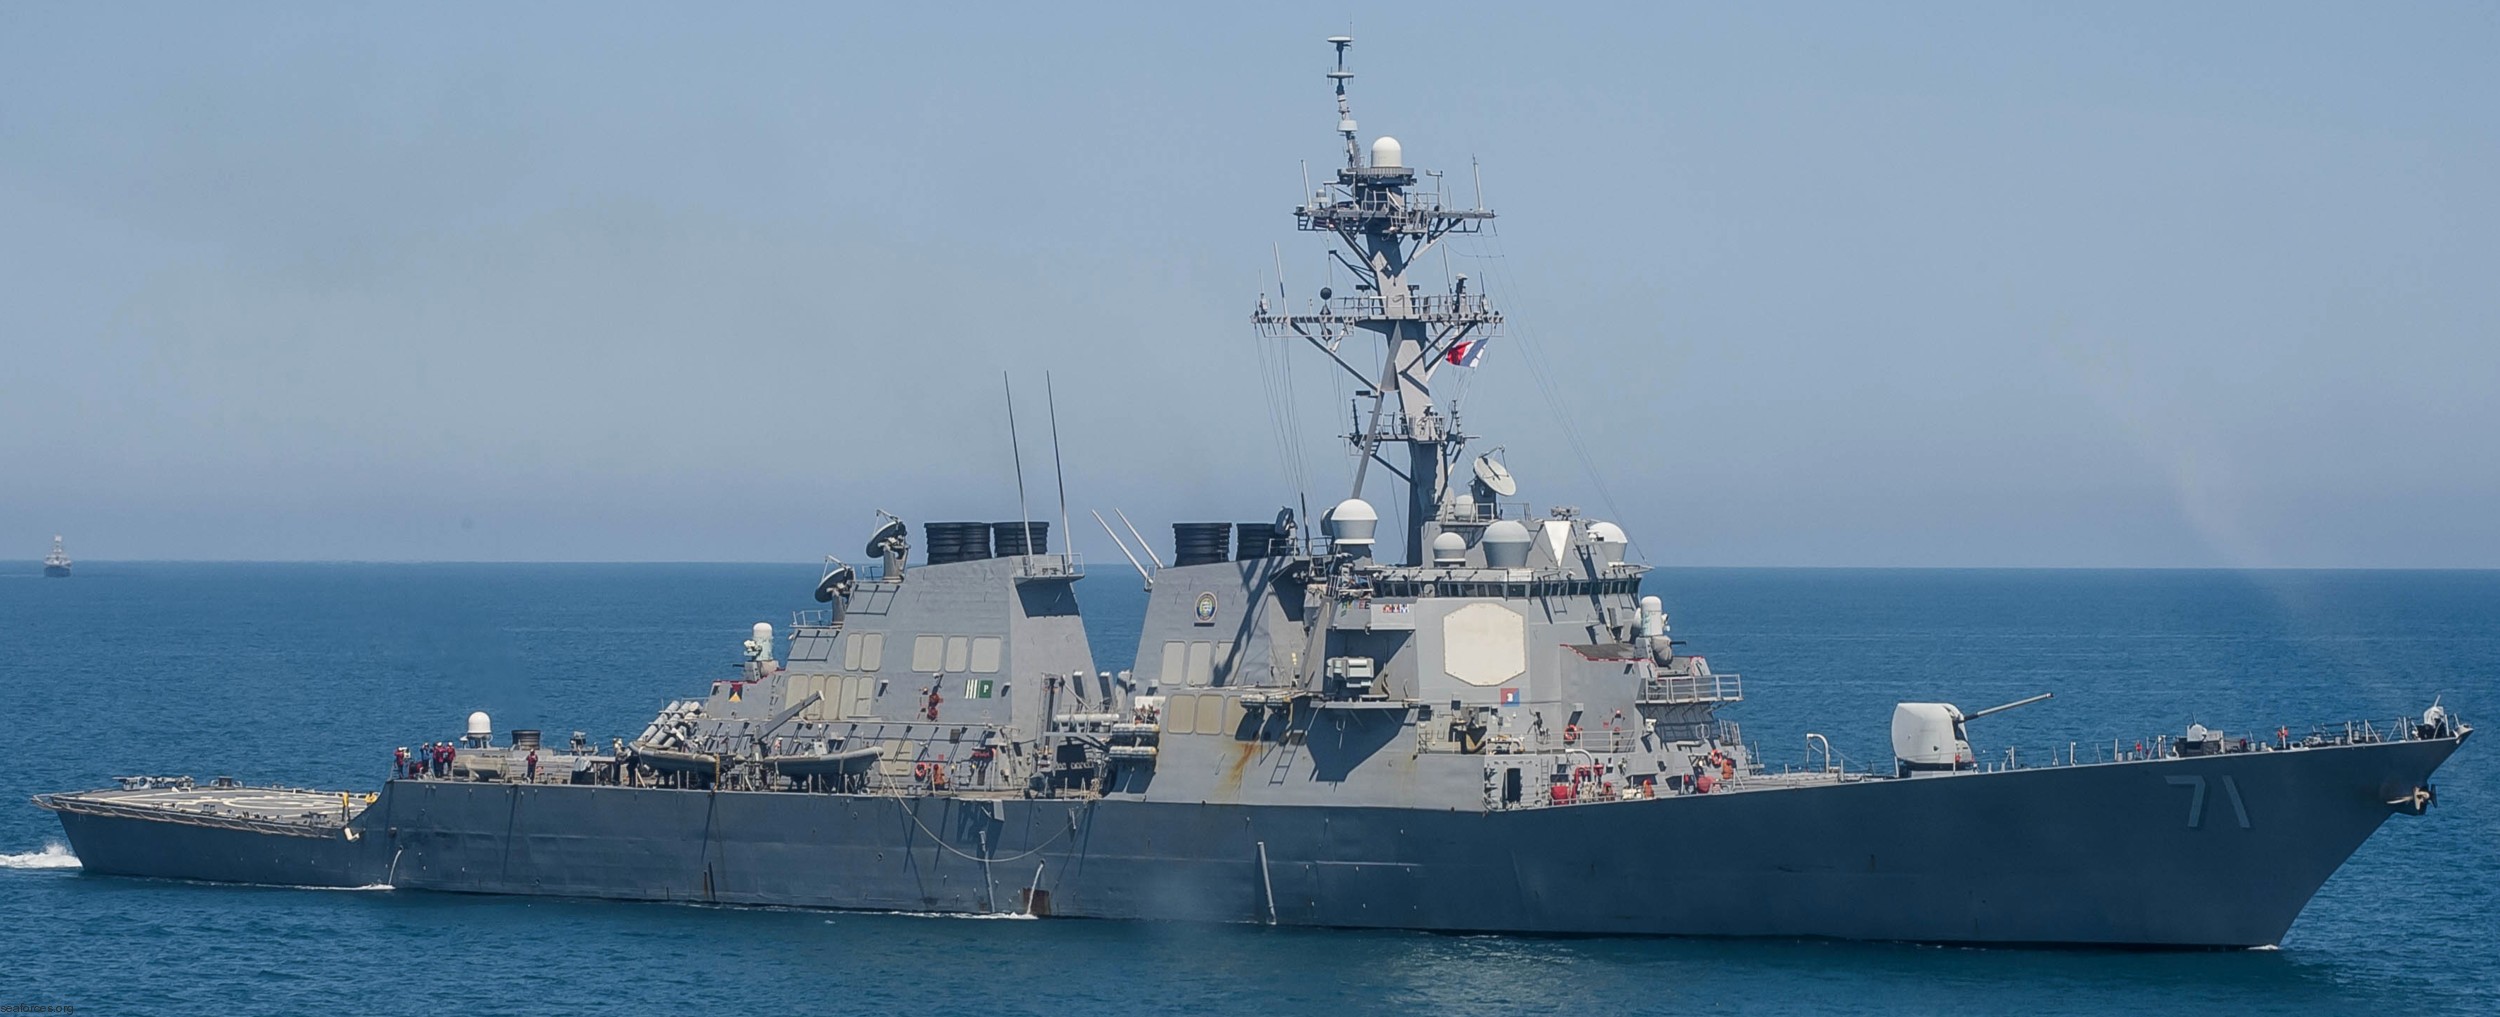 ddg-71 uss ross guided missile destroyer arleigh burke class aegis bmd 53